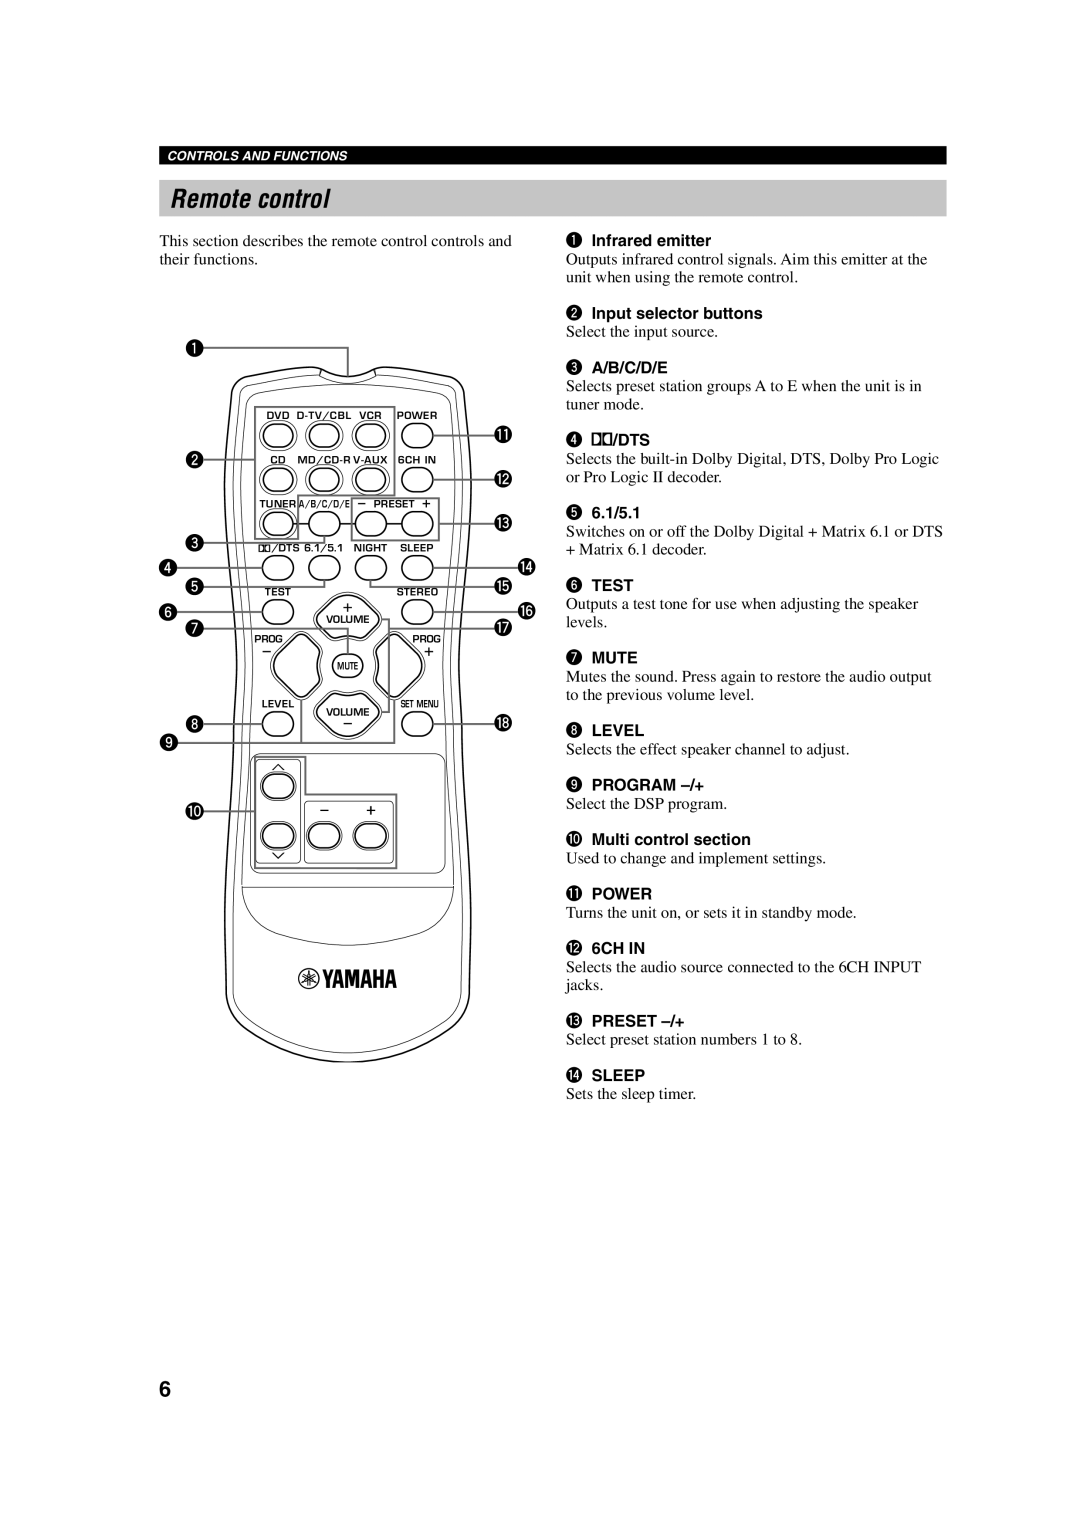 Yamaha HTR-5630RDS Remote control, Infrared emitter, Input selector buttons, 3 A/B/C/D/E, q 4 q/DTS, 5 6.1/5.1, t 6 TEST 